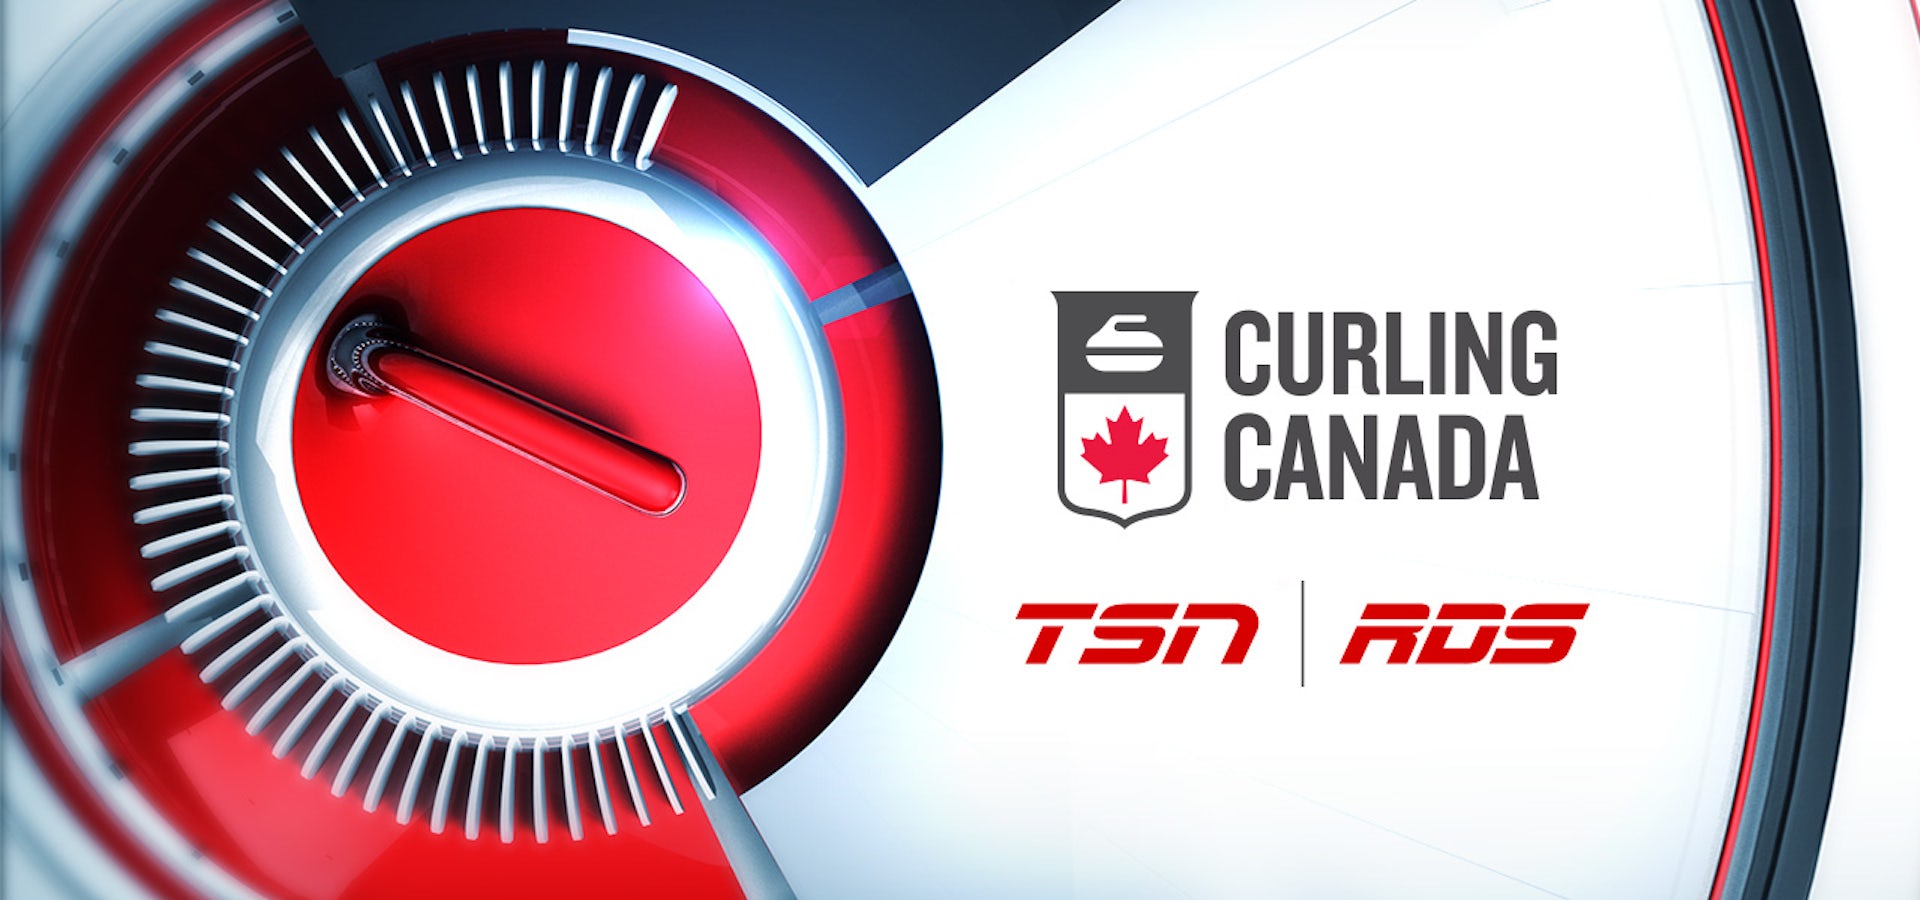 Curling Canada, TSN, and RDS Announce EightYear Extension of Broadcast